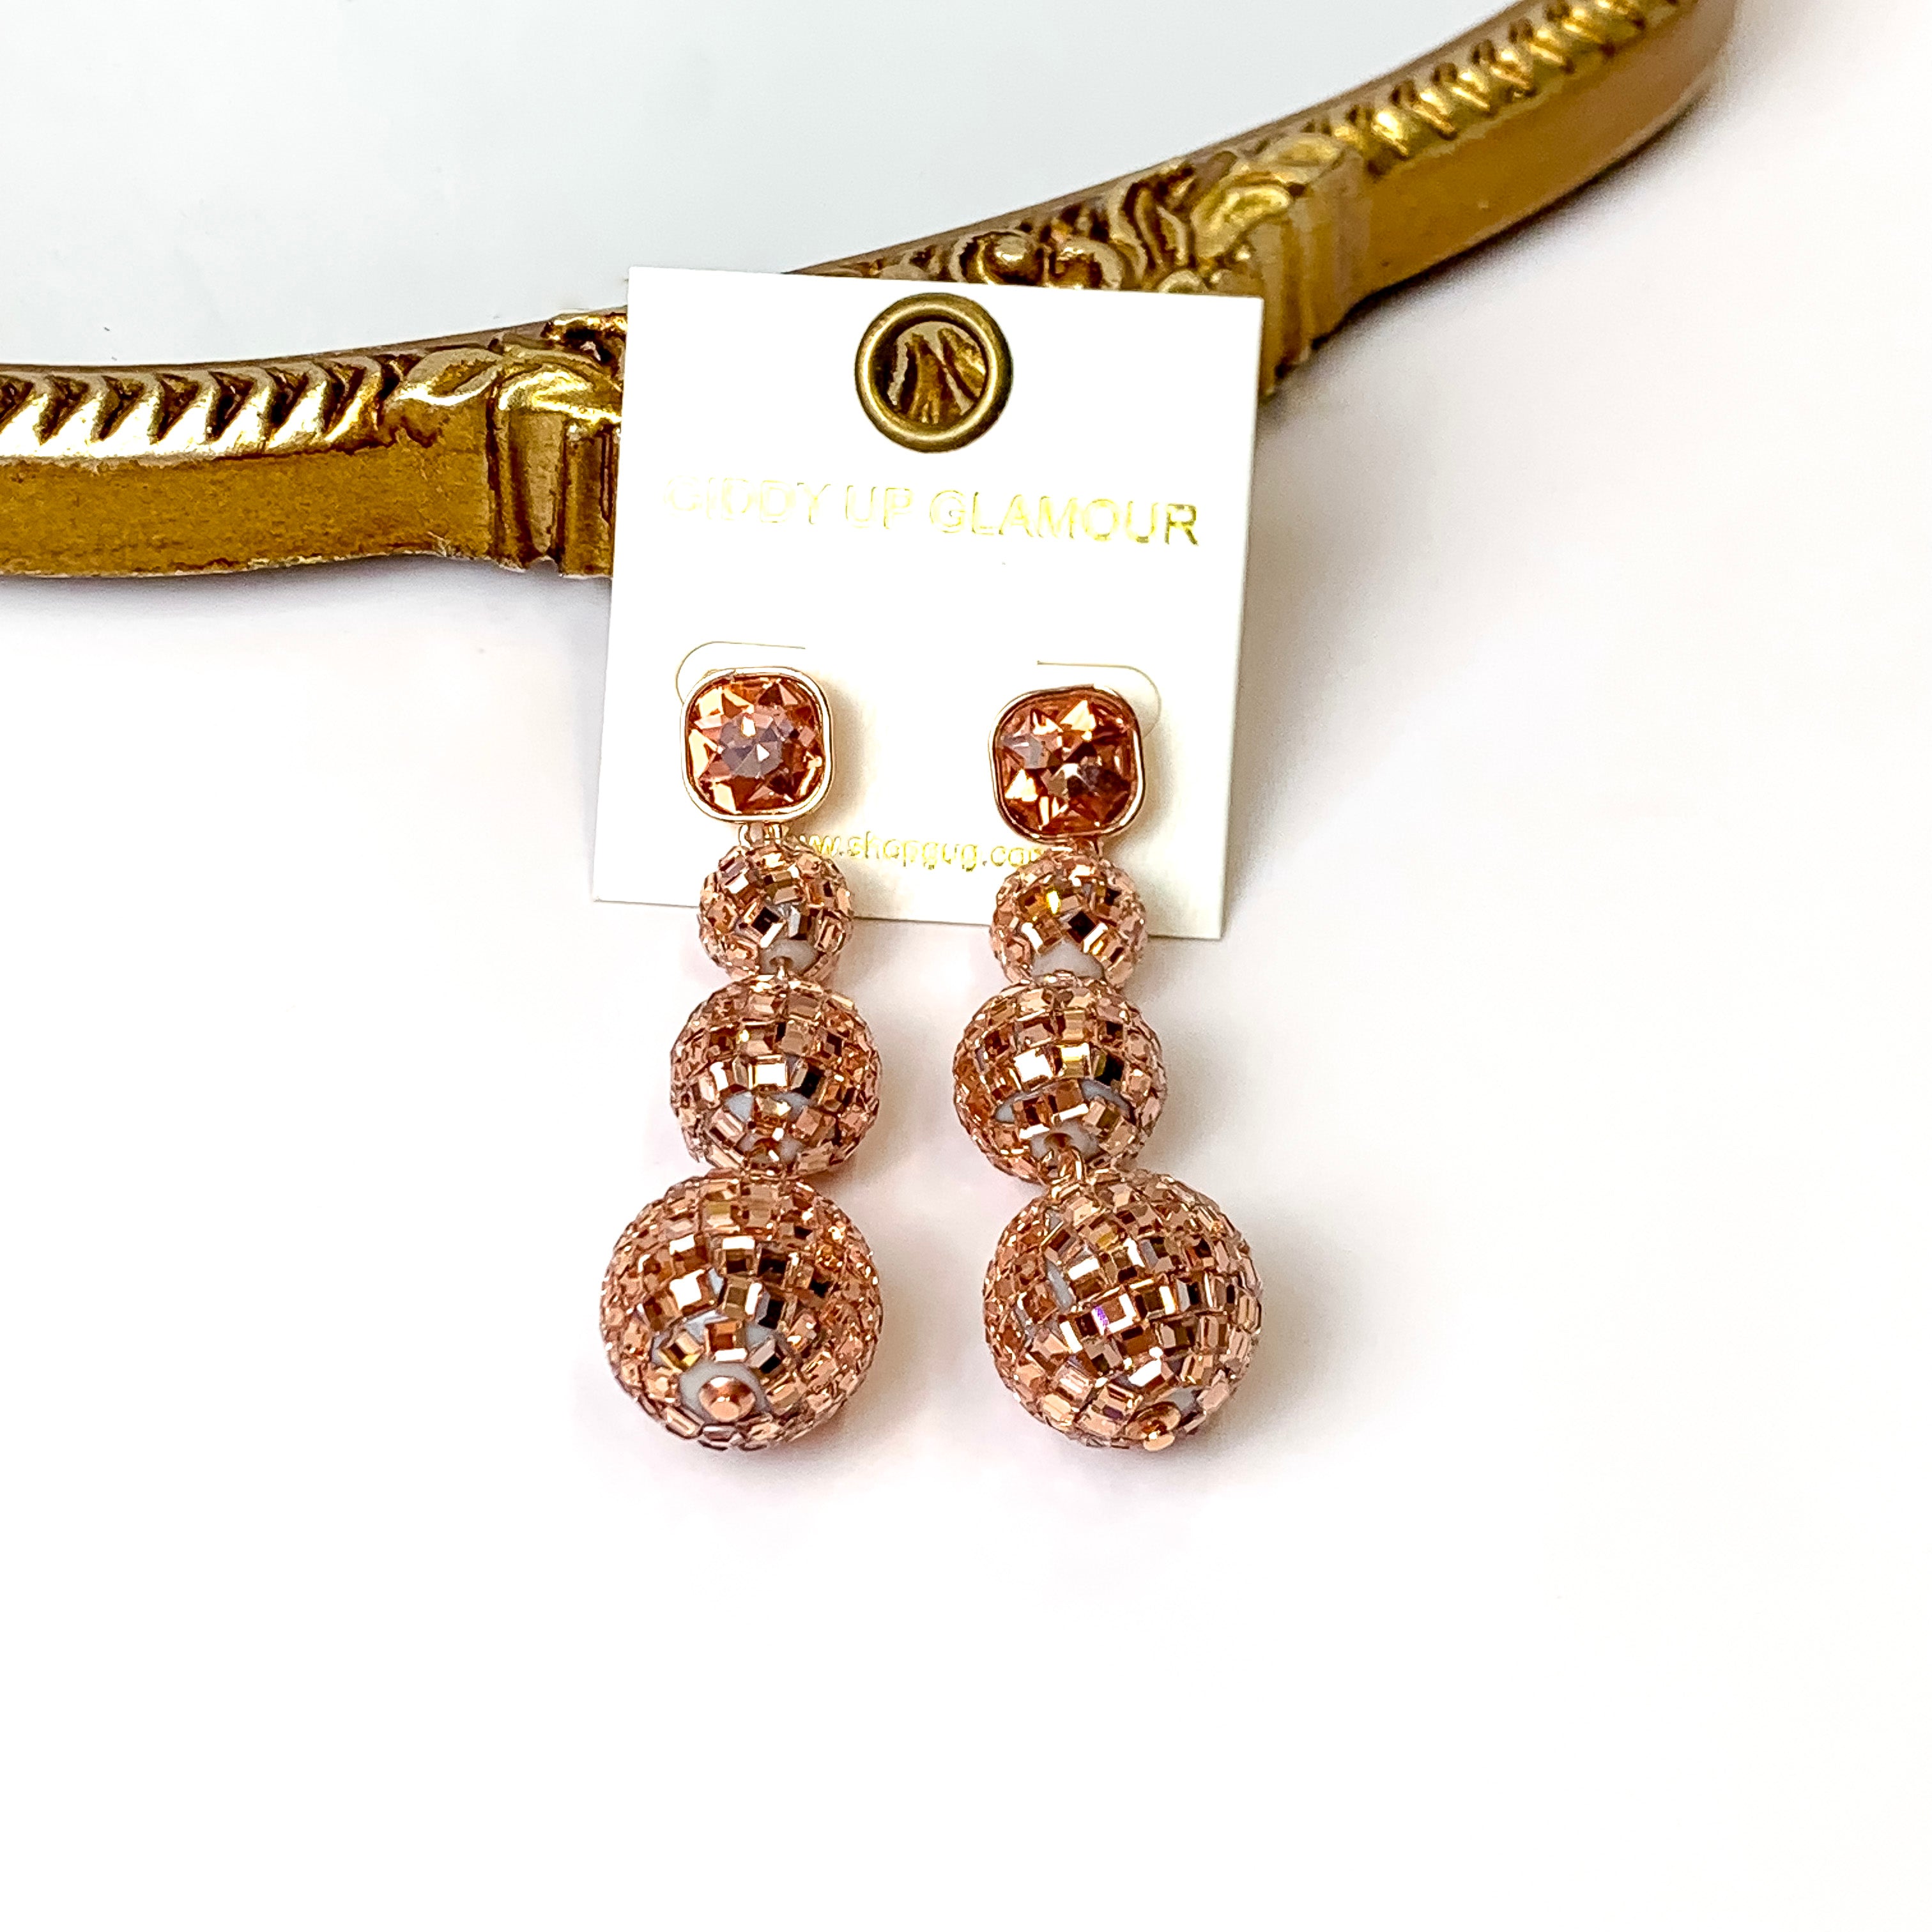 Cushion Crystal Post Disco Ball Dangle Earrings in Rose Gold Tone - Giddy Up Glamour Boutique